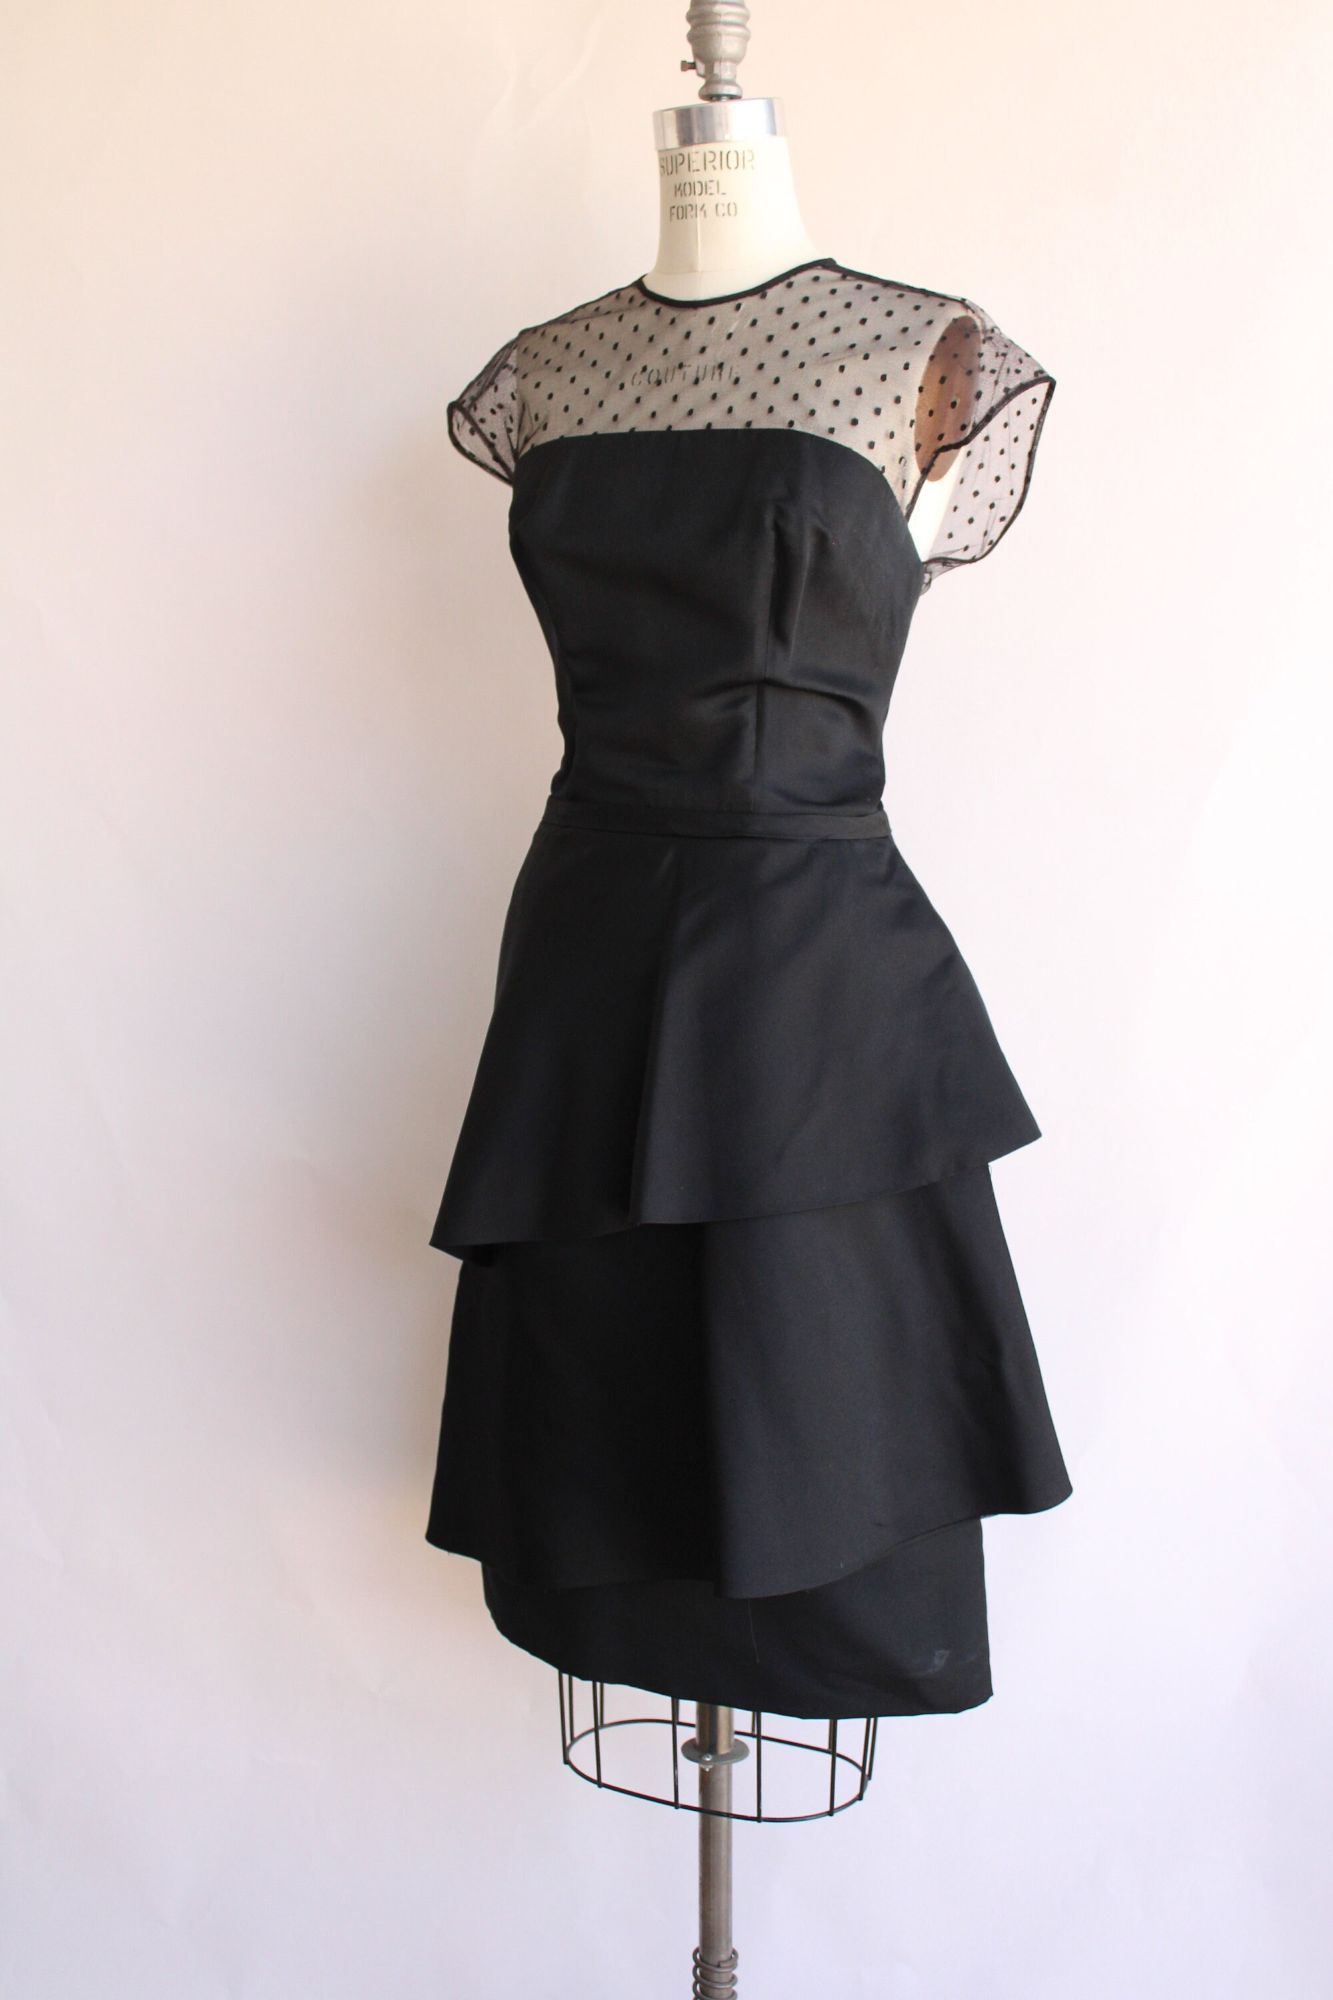 Vintage 1950s 1960s Black Cocktail Dress With Swiss Dot Illusion Lace Neckline and Tiered Skirt